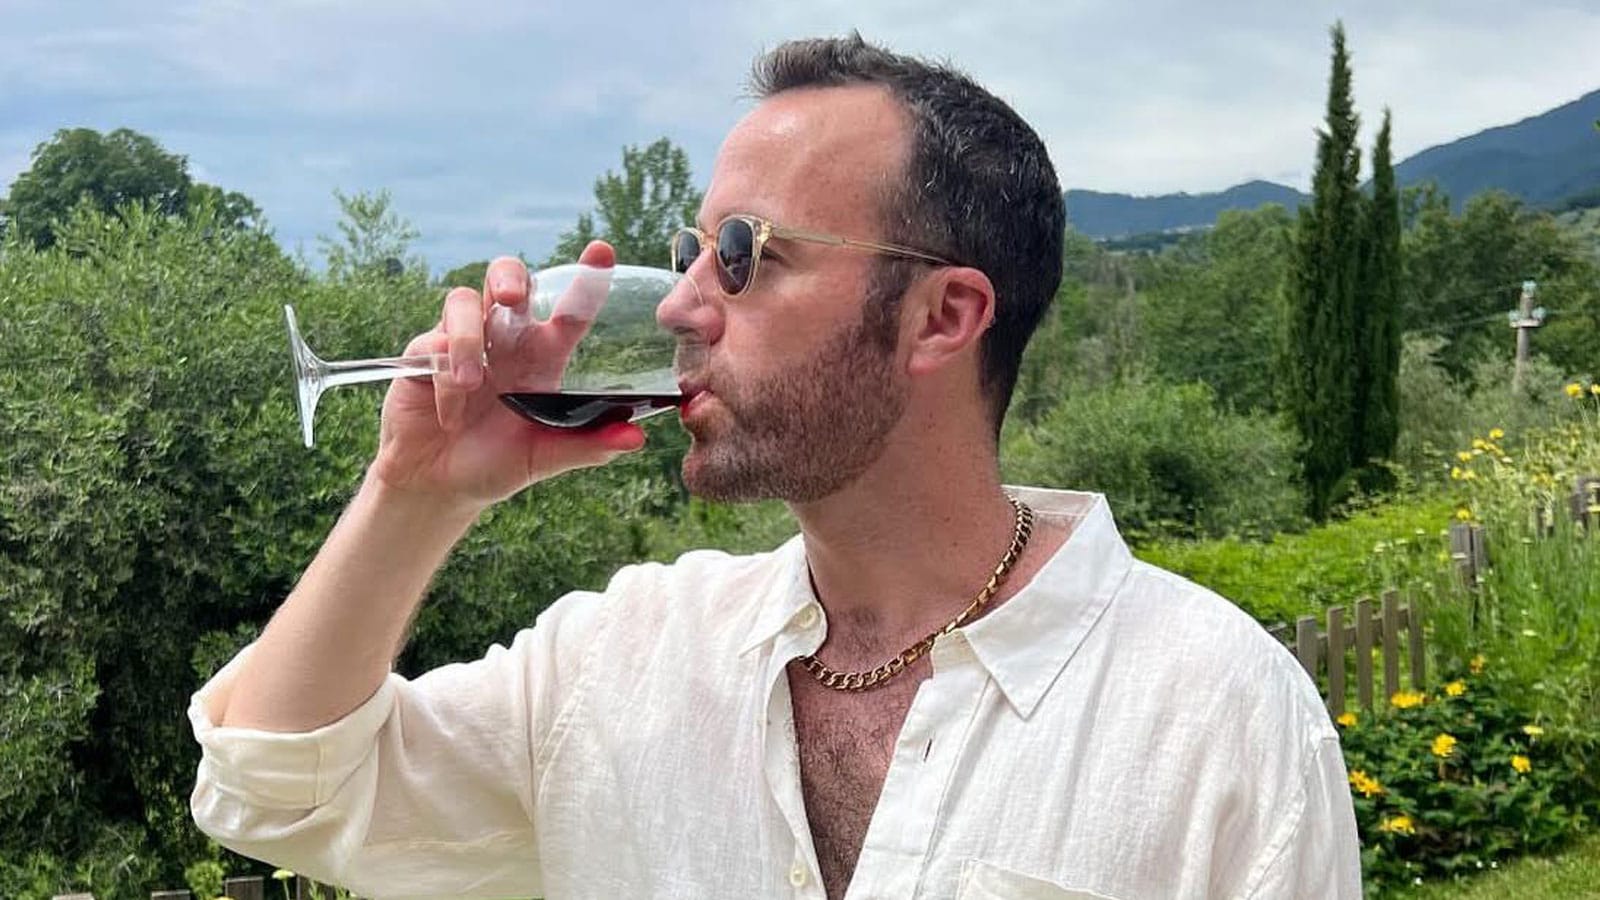 The author in a cream linen shirt and cool sunglasses, enjoying a glass of red wine in the verdant hills of Italy